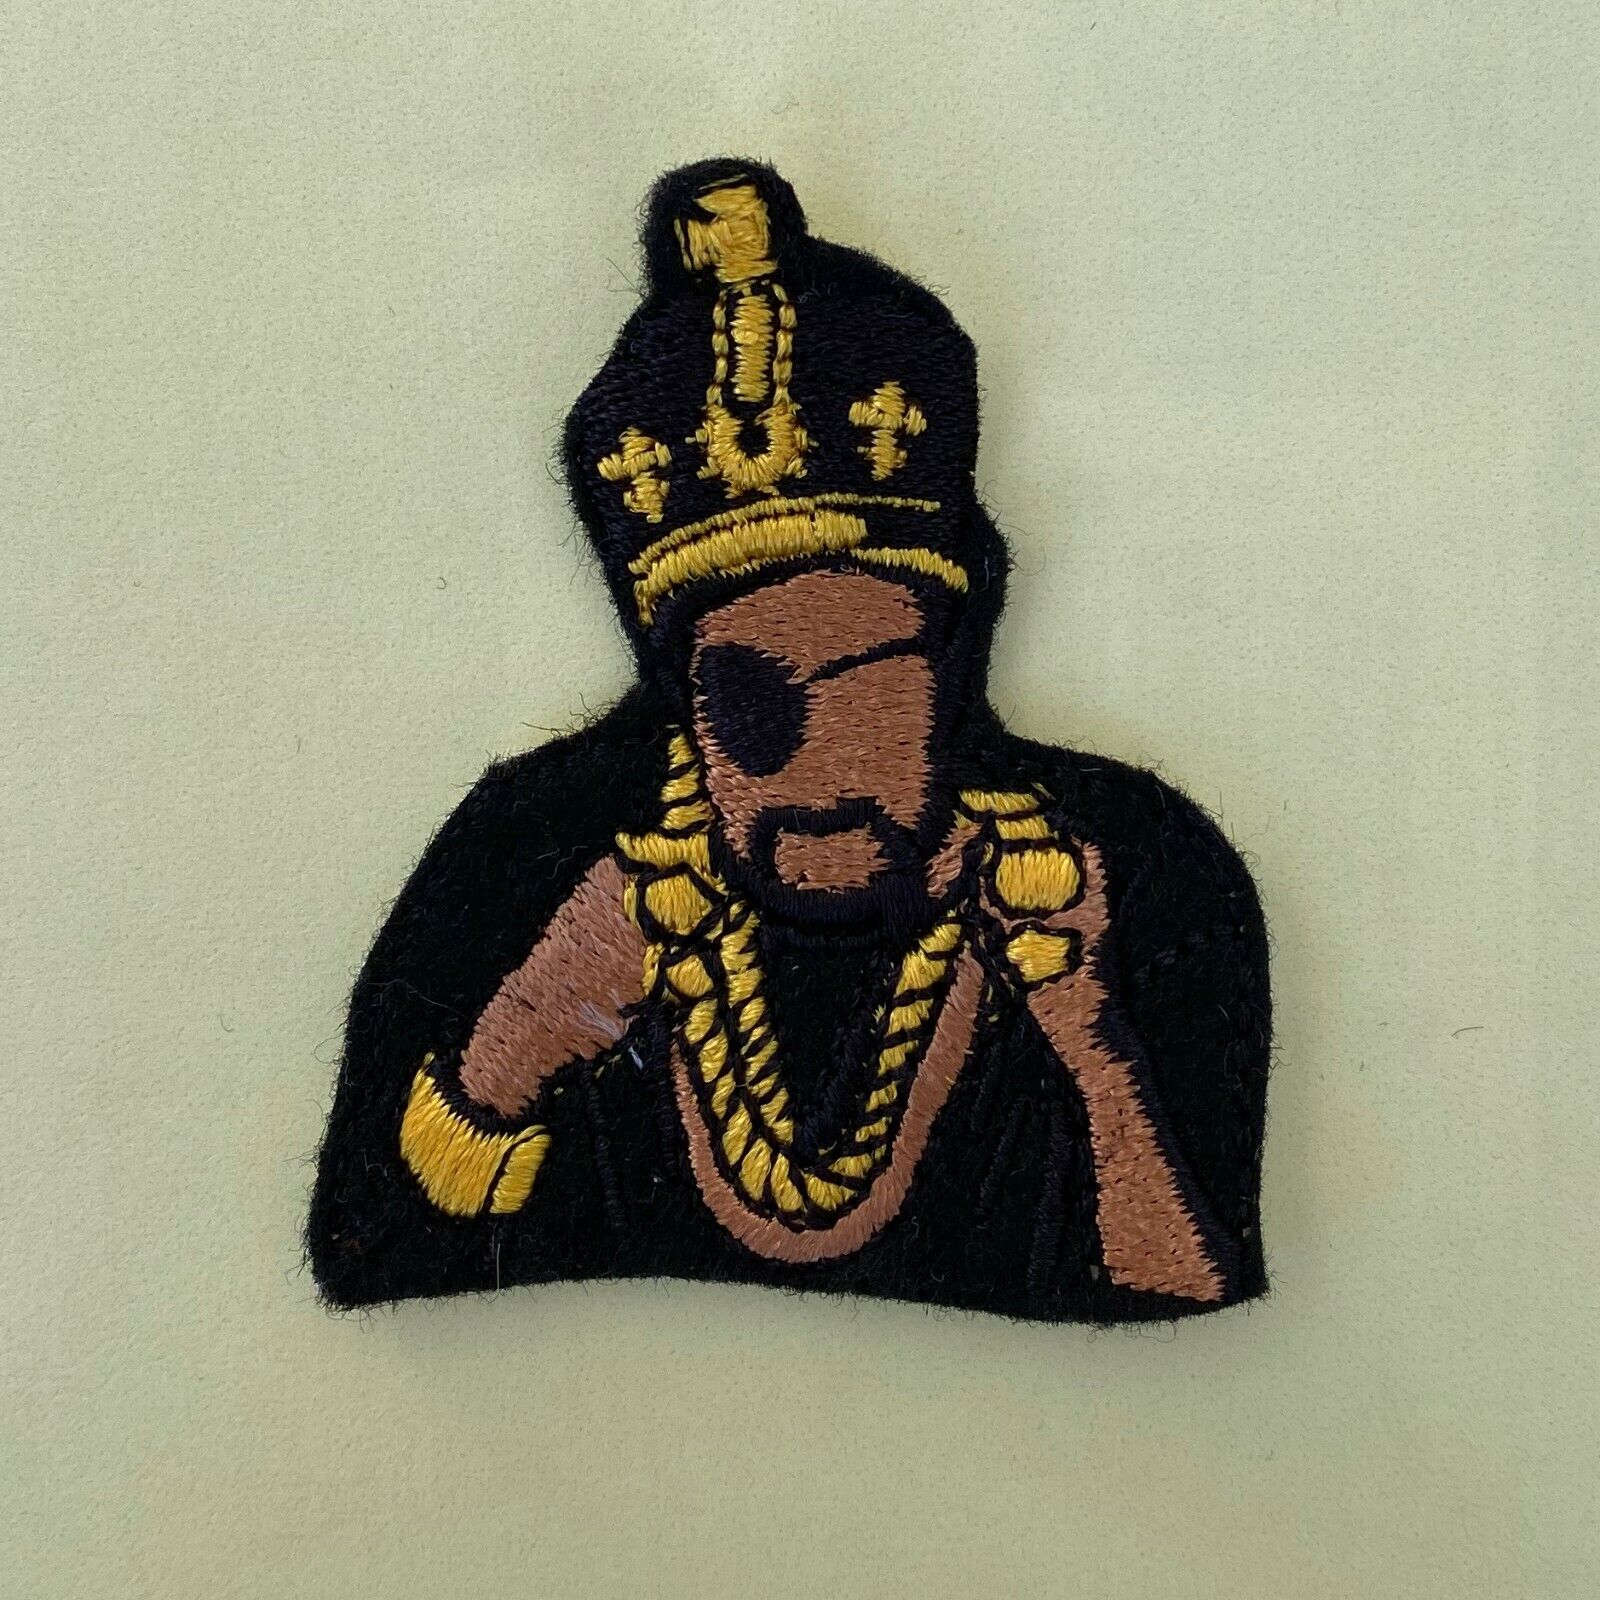 Iron on Patch - Slick Rick Small Embroidered Hip Hop Rap